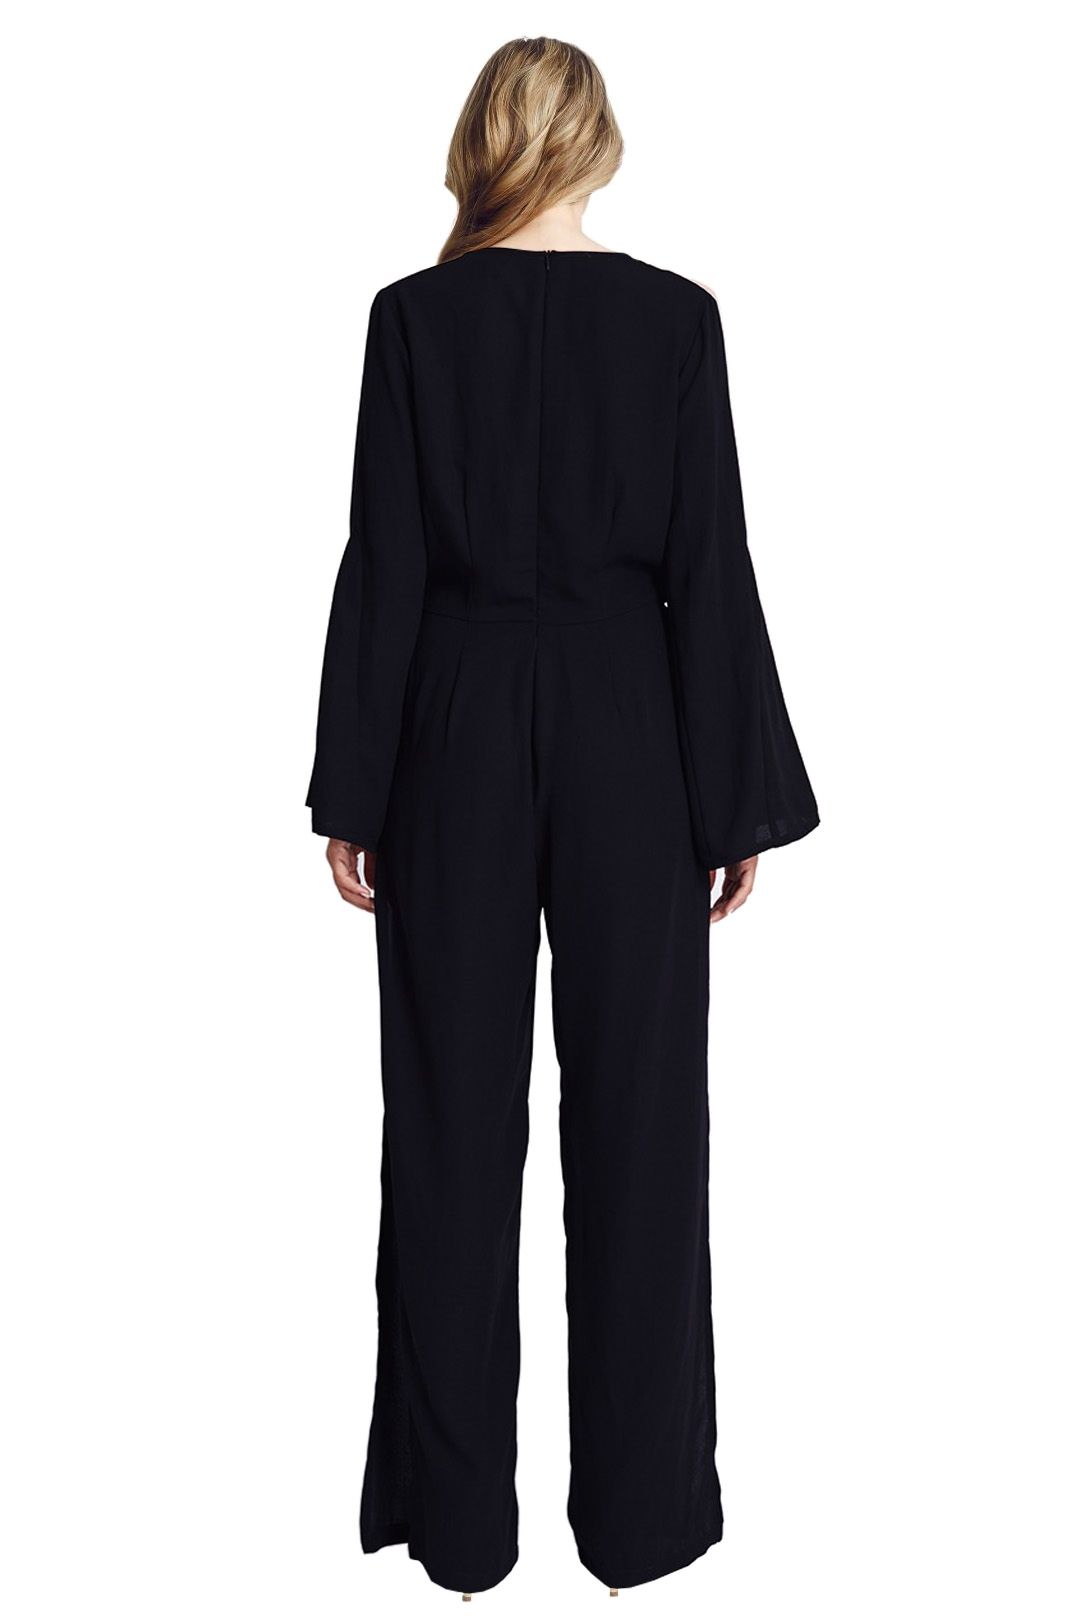 Maurie & Eve - The Runaway Jumpsuit - Black - Back